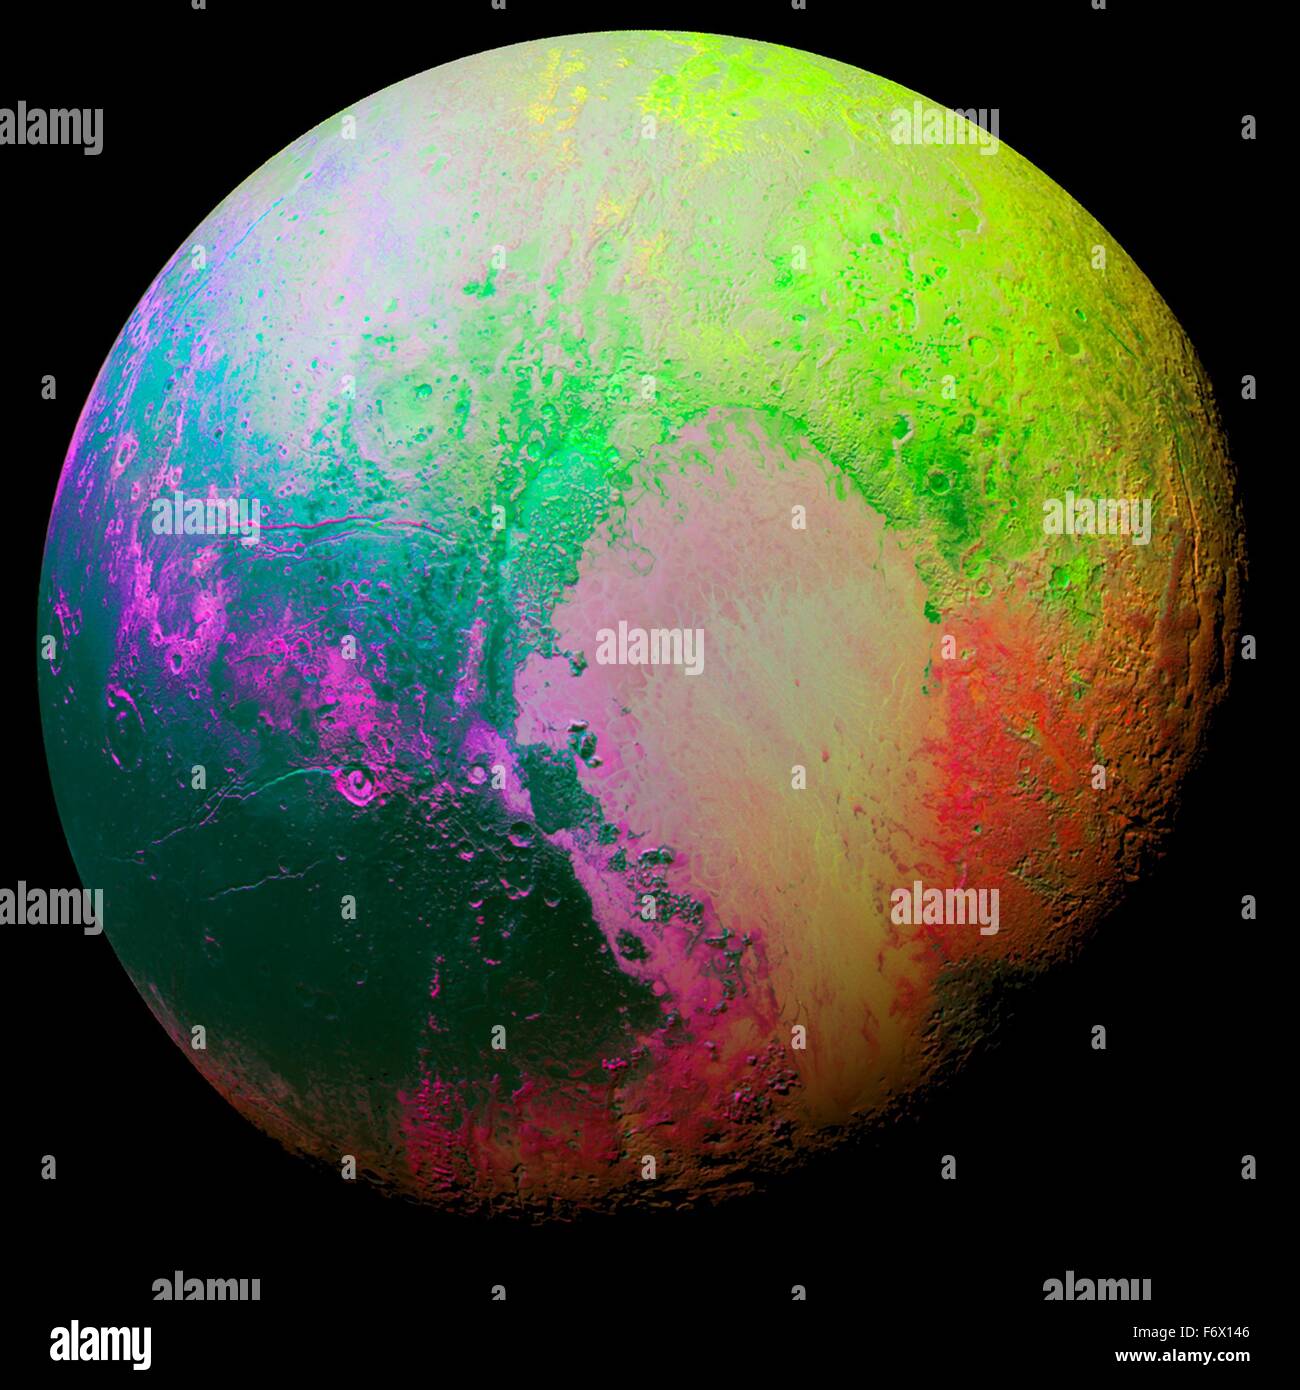 New Horizons scientists made this false color image of Pluto to highlight the many subtle color differences between Pluto's distinct regions captured July 14, 2015 by the New Horizons space probe. Stock Photo